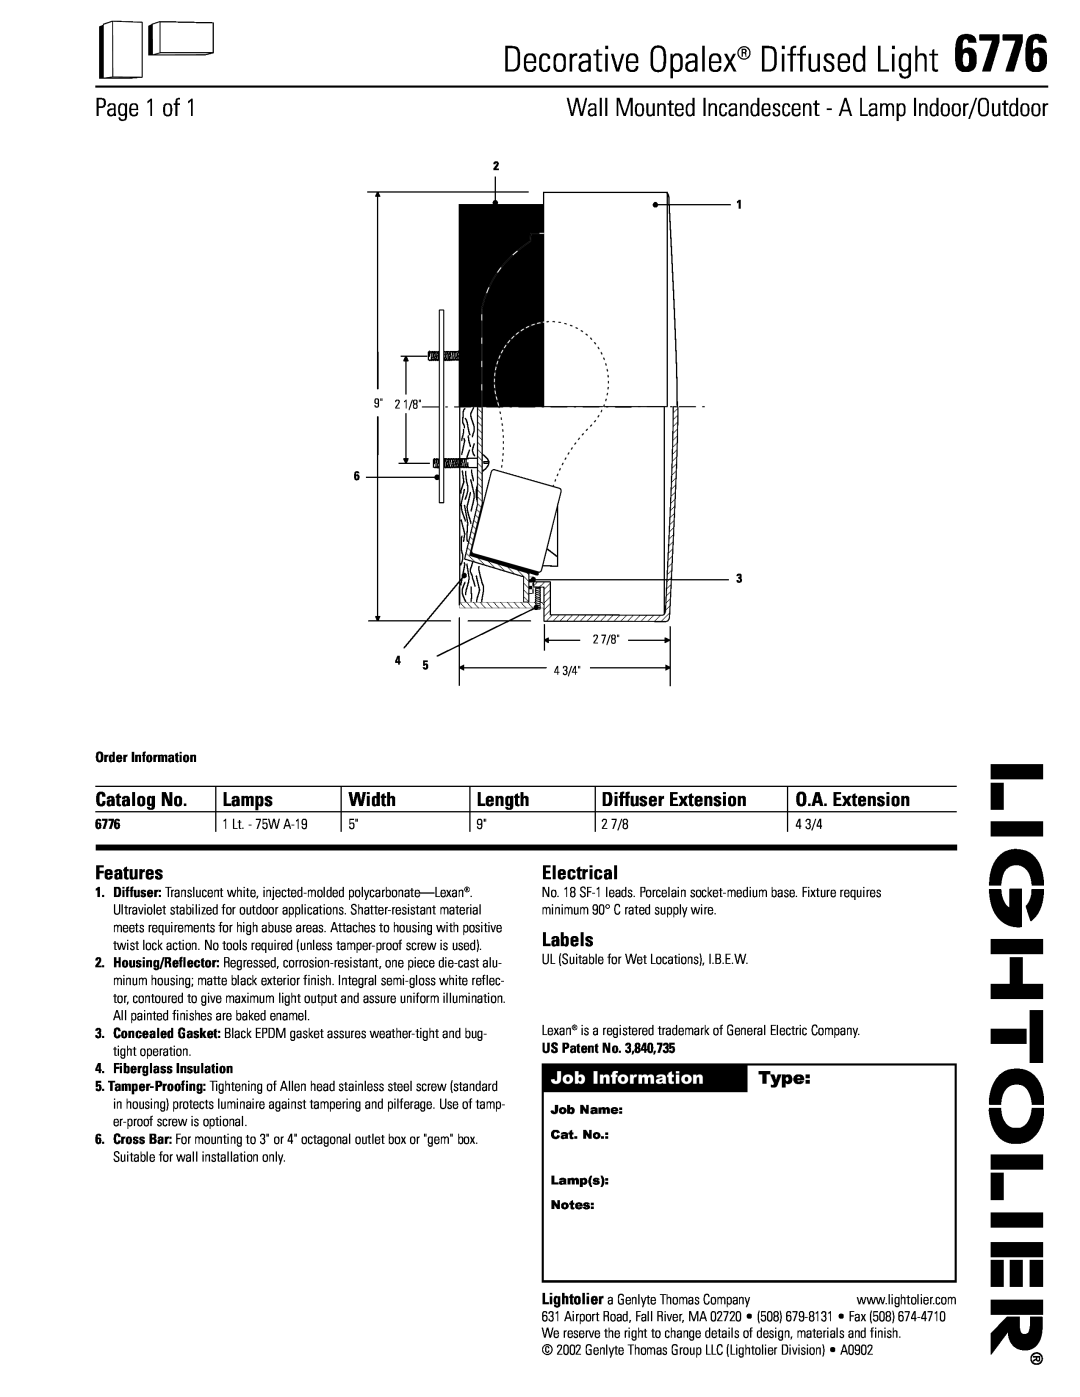 Lightolier 6776 manual Decorative Opalex Diffused Light, Page 1 of, Wall Mounted Incandescent - A Lamp Indoor/Outdoor 